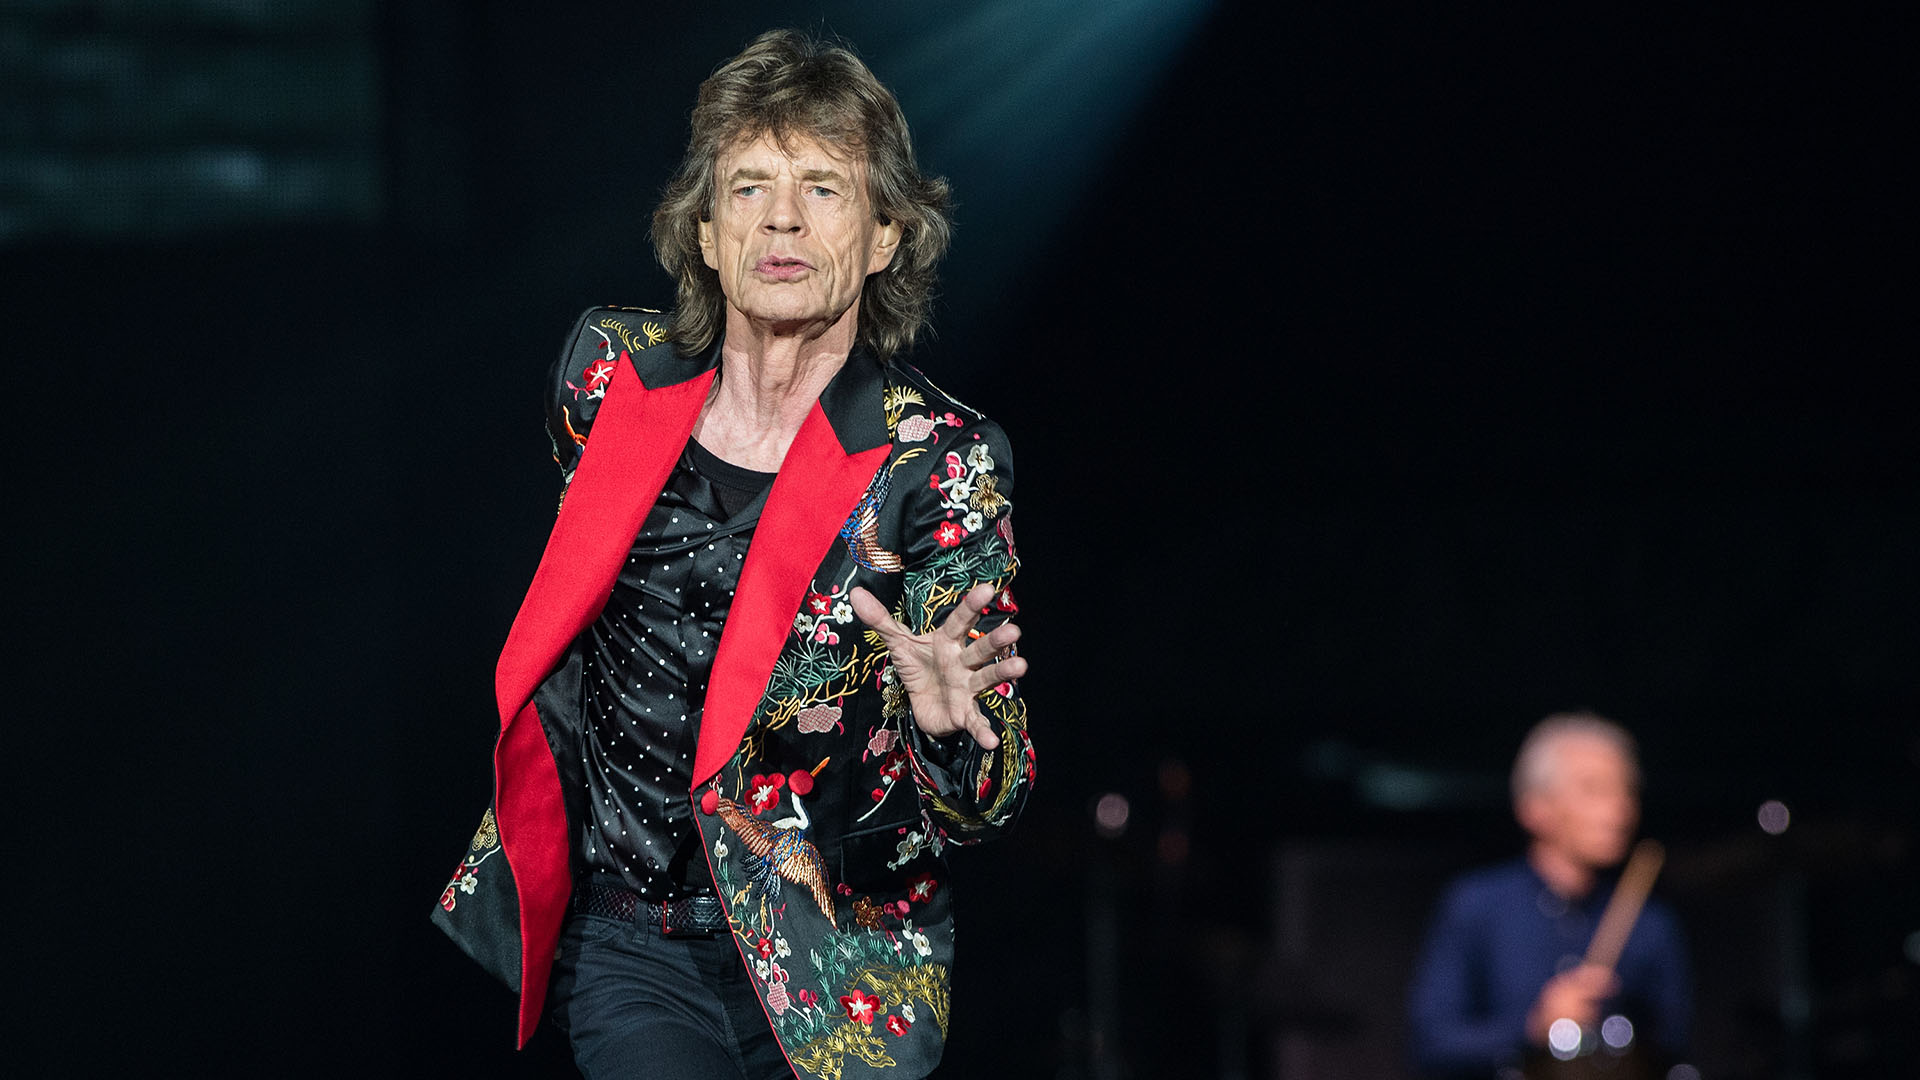 NANTERRE, FRANCE - OCTOBER 19: Mick Jagger of The Rolling Stones performs live on stage at U Arena on October 19, 2017 in Nanterre, France. (Photo by Brian Rasic/WireImage)